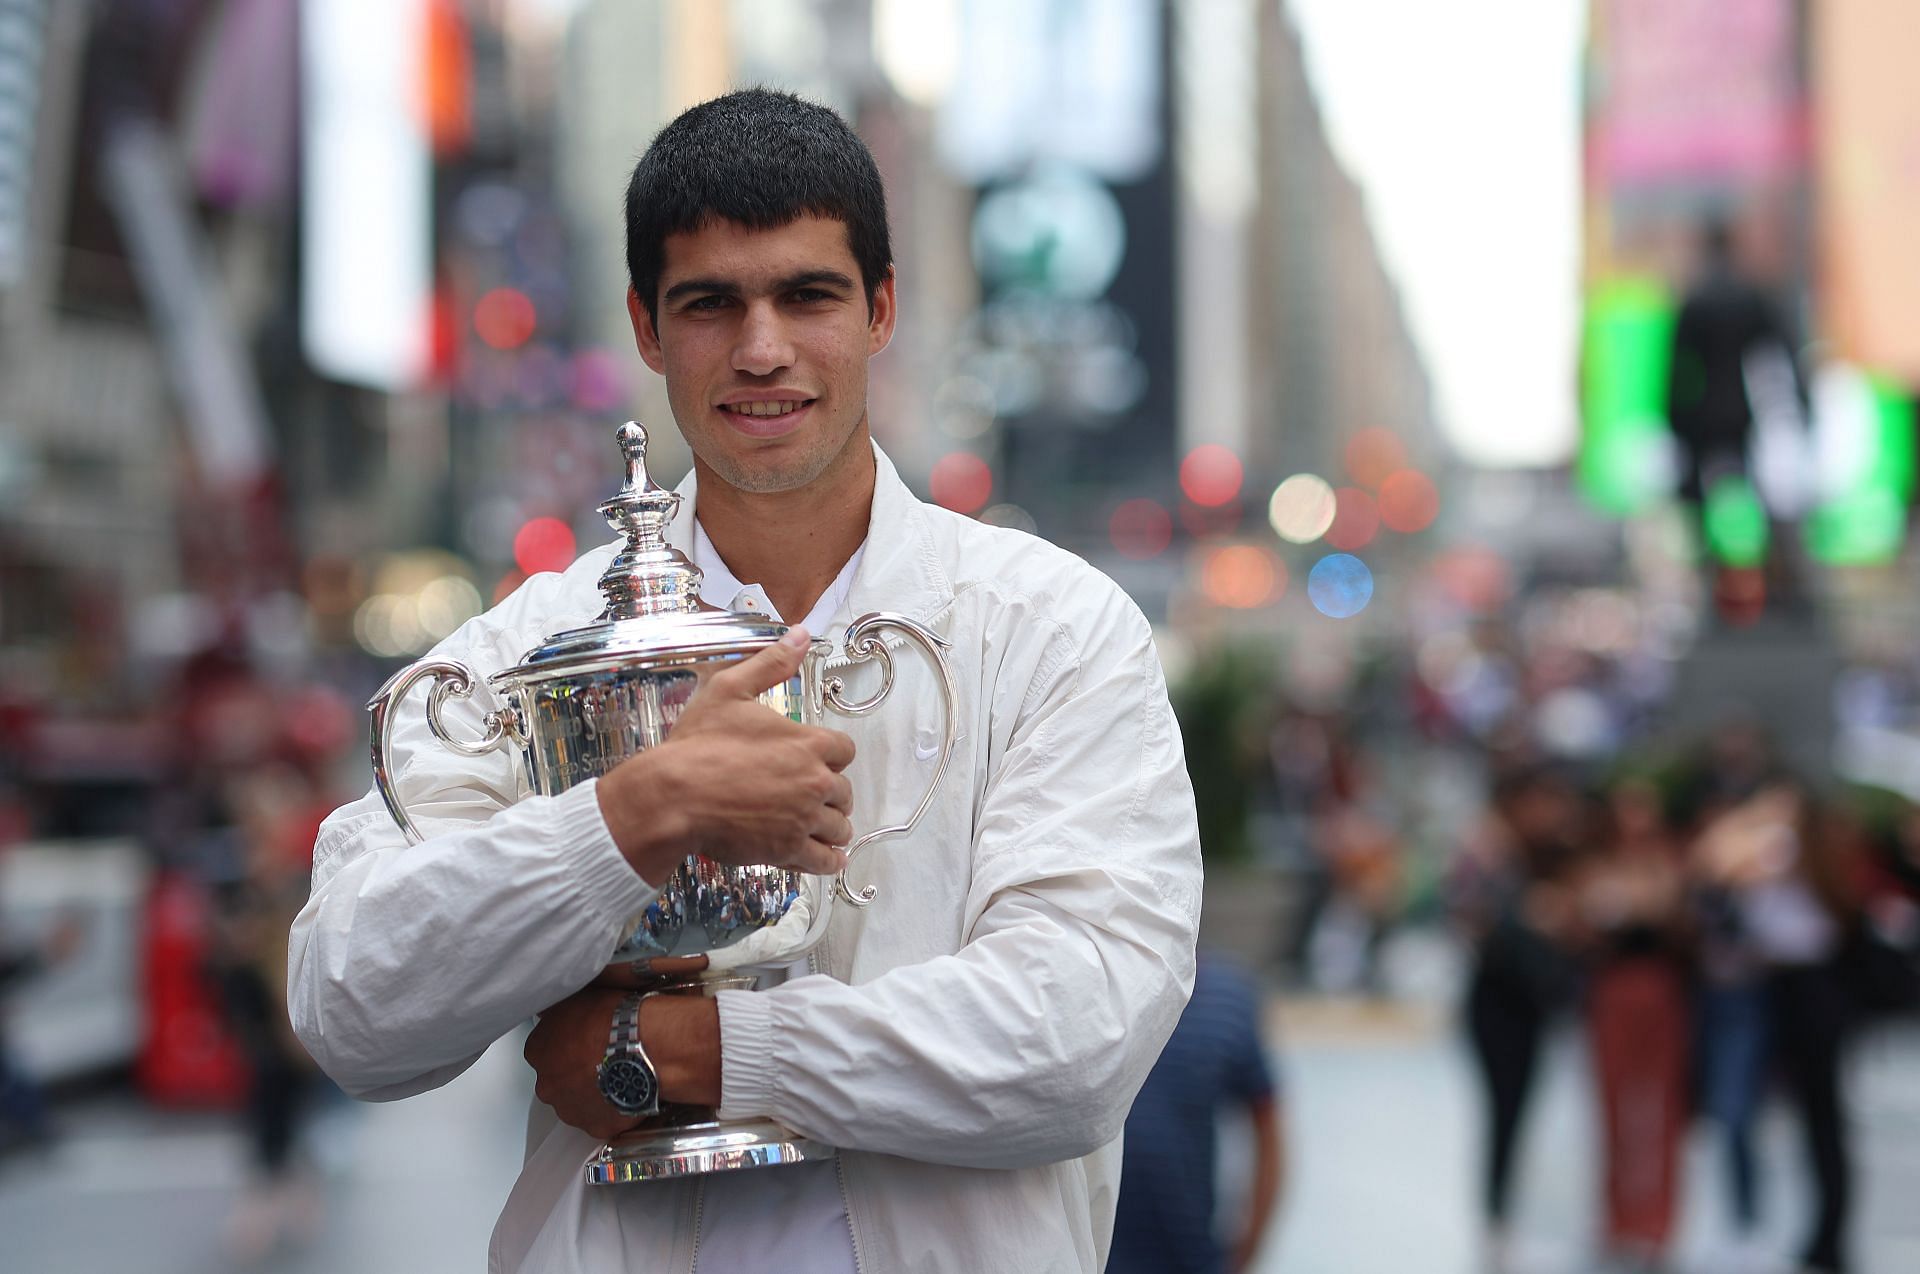 Carlos Alcaraz - 2022 US Open Champion and youngest World No. in in history